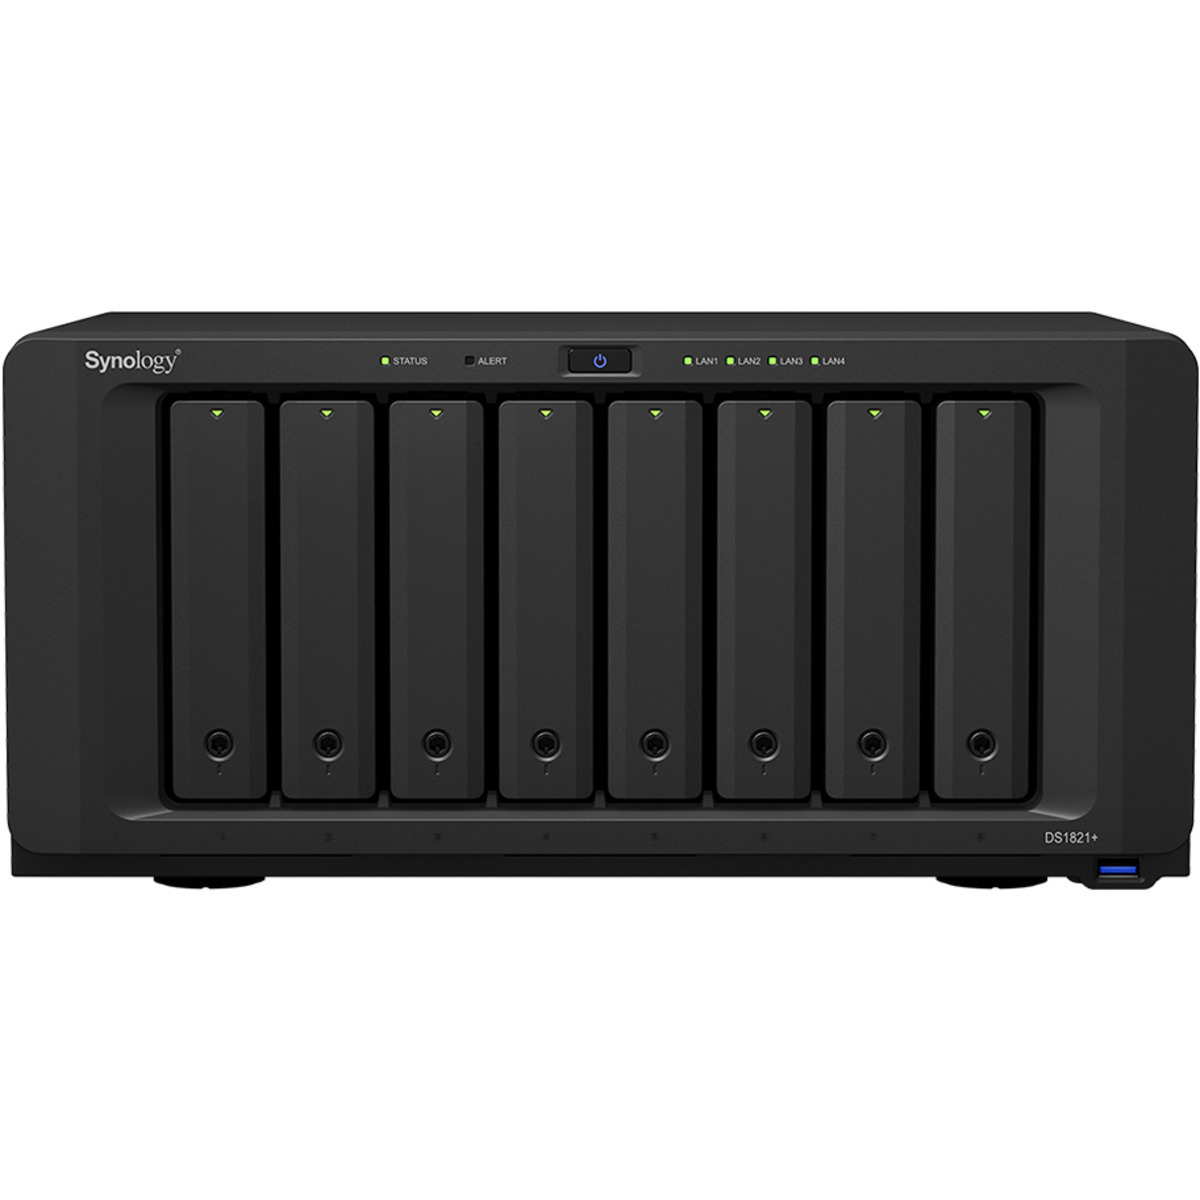 Synology DiskStation DS1821+ 64tb 8-Bay Desktop Multimedia / Power User / Business NAS - Network Attached Storage Device 8x8tb Western Digital Red Plus WD80EFPX 3.5 7200rpm SATA 6Gb/s HDD NAS Class Drives Installed - Burn-In Tested - FREE RAM UPGRADE DiskStation DS1821+